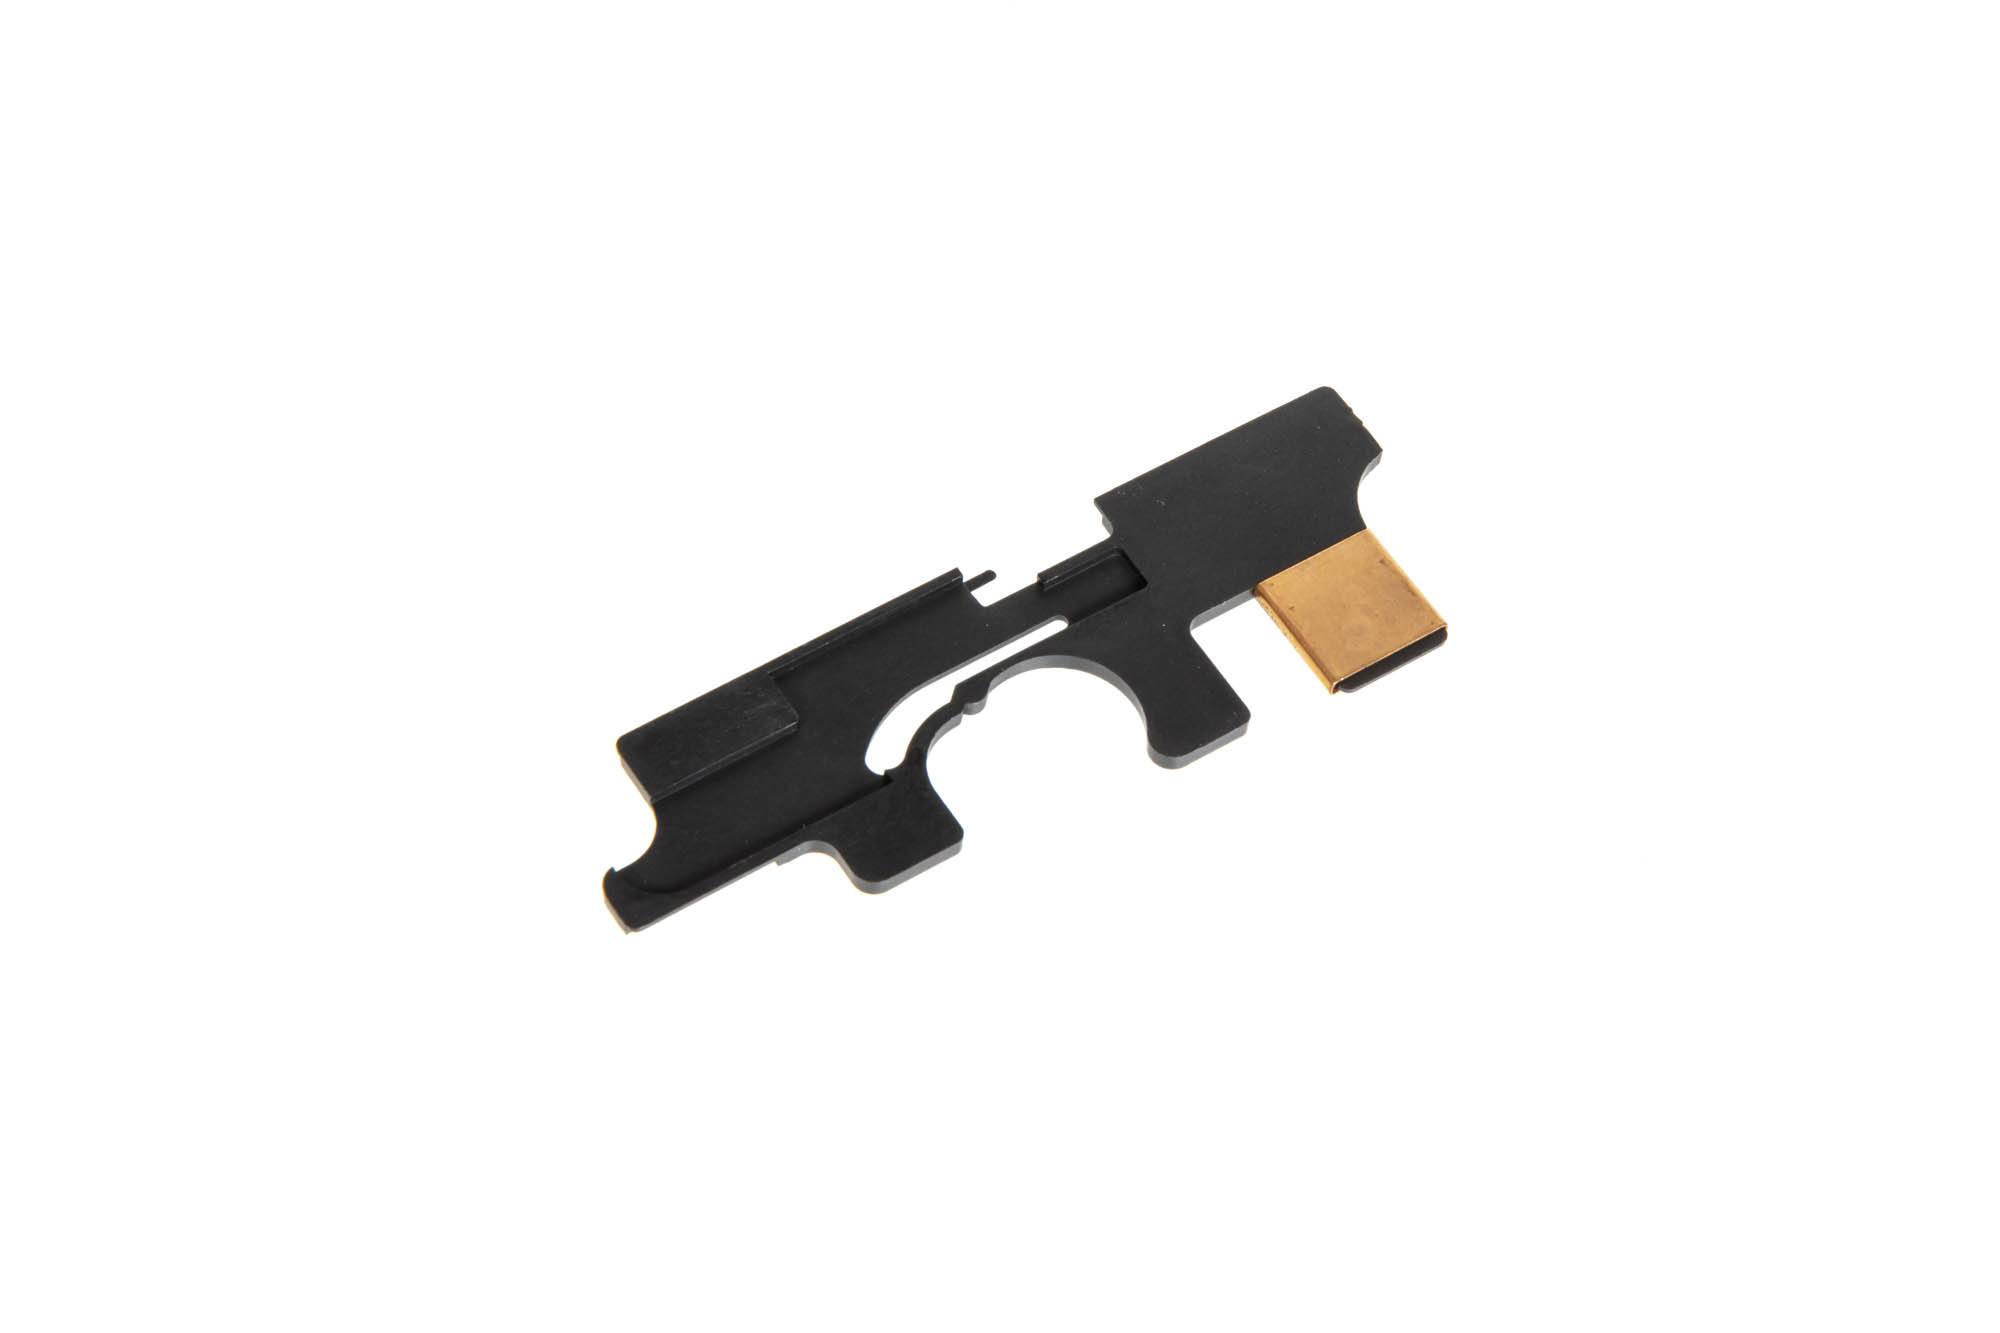 Selector plate for MP5 airsoft rifles